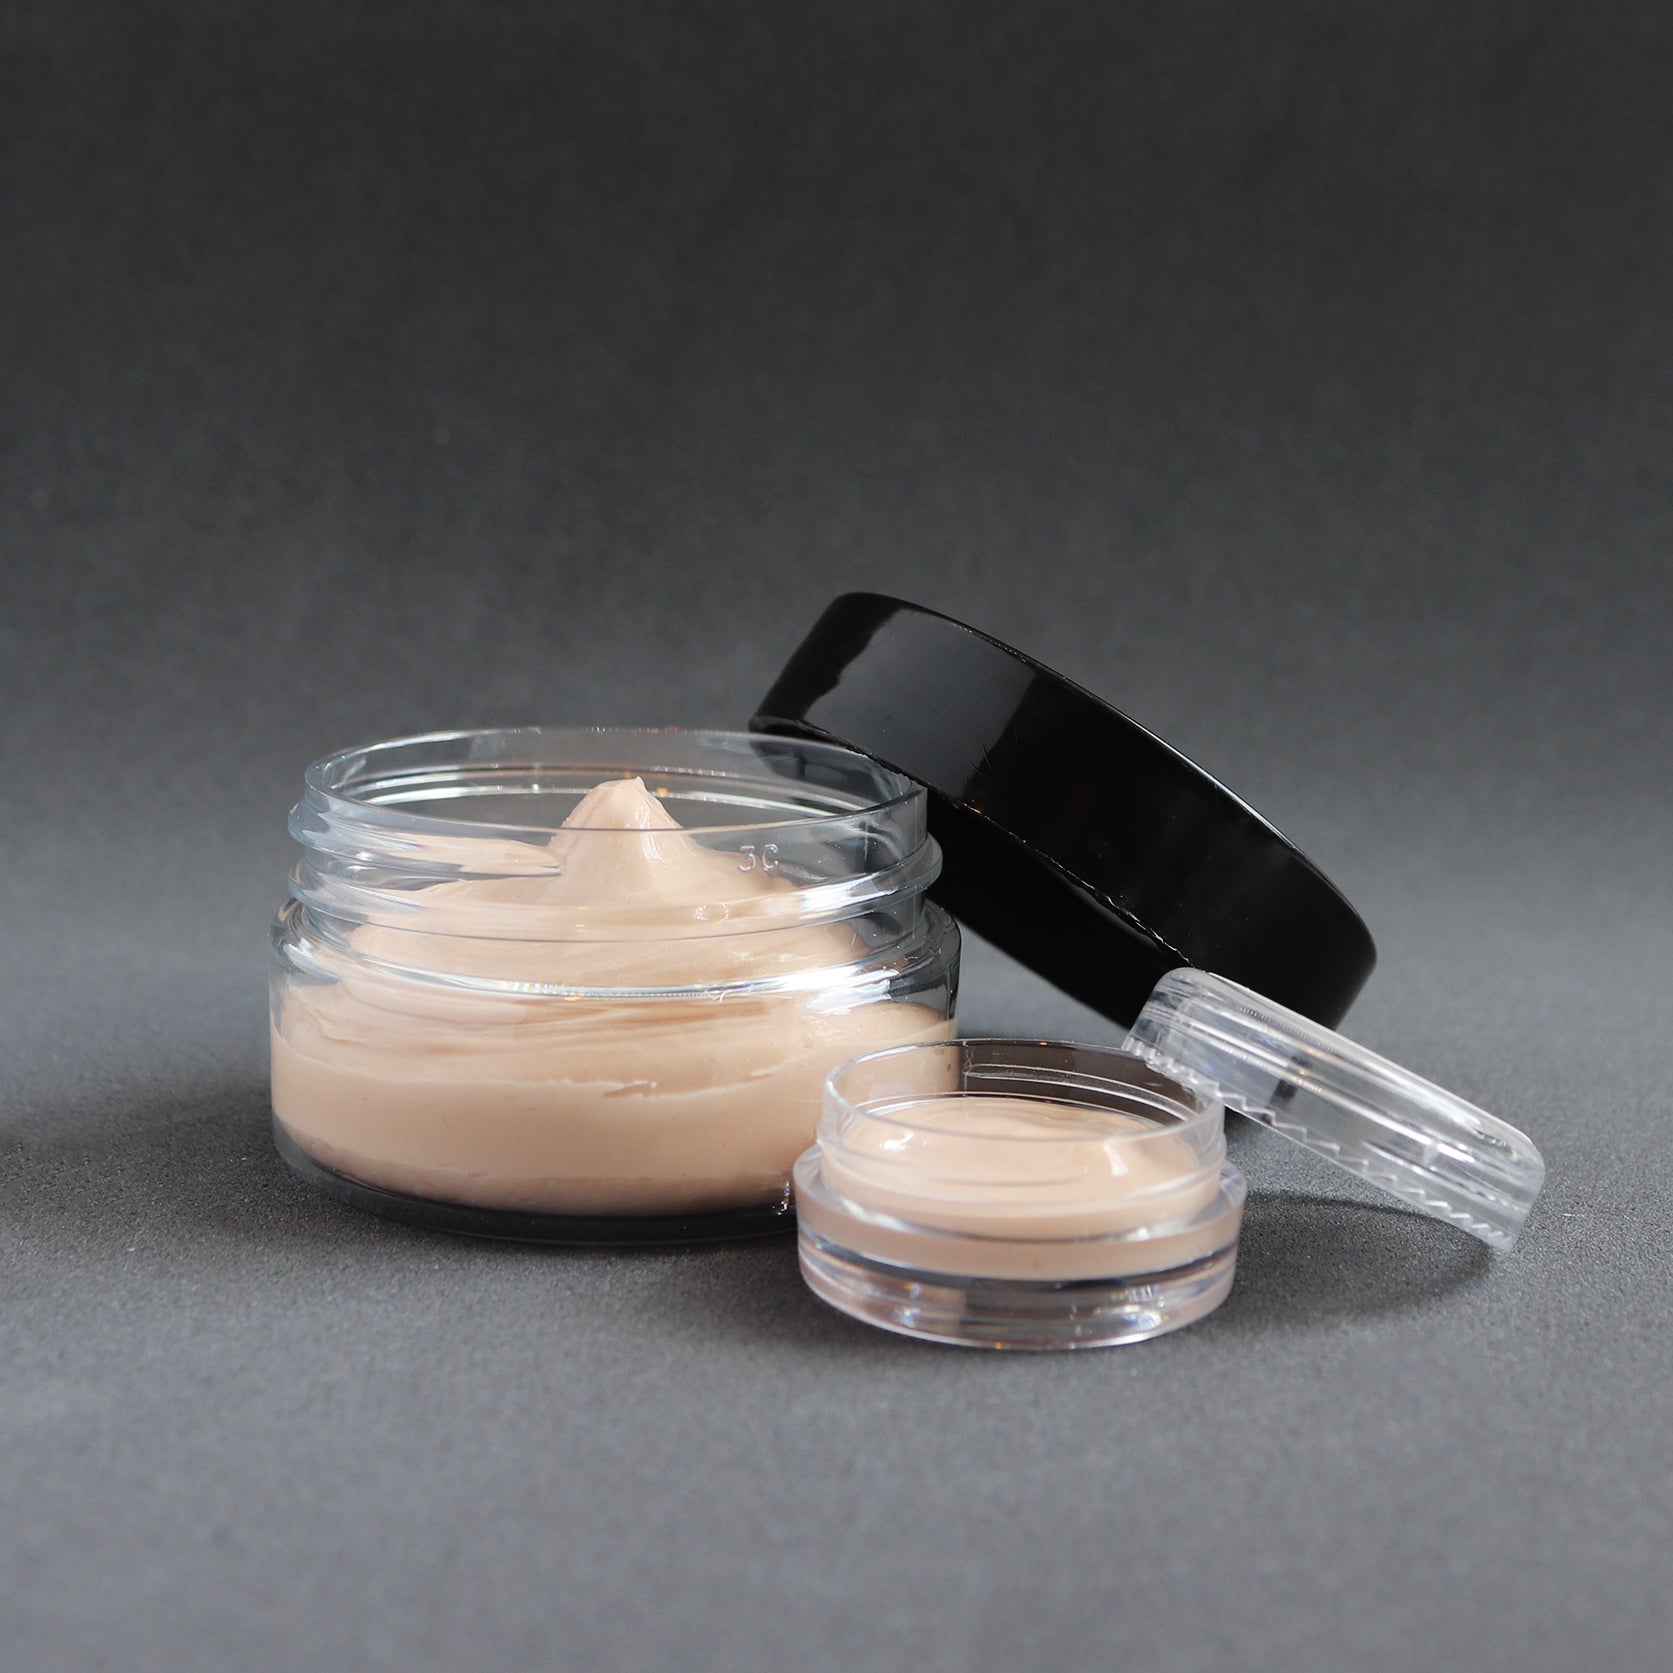 Two pots of Silicone Sculpting Gel